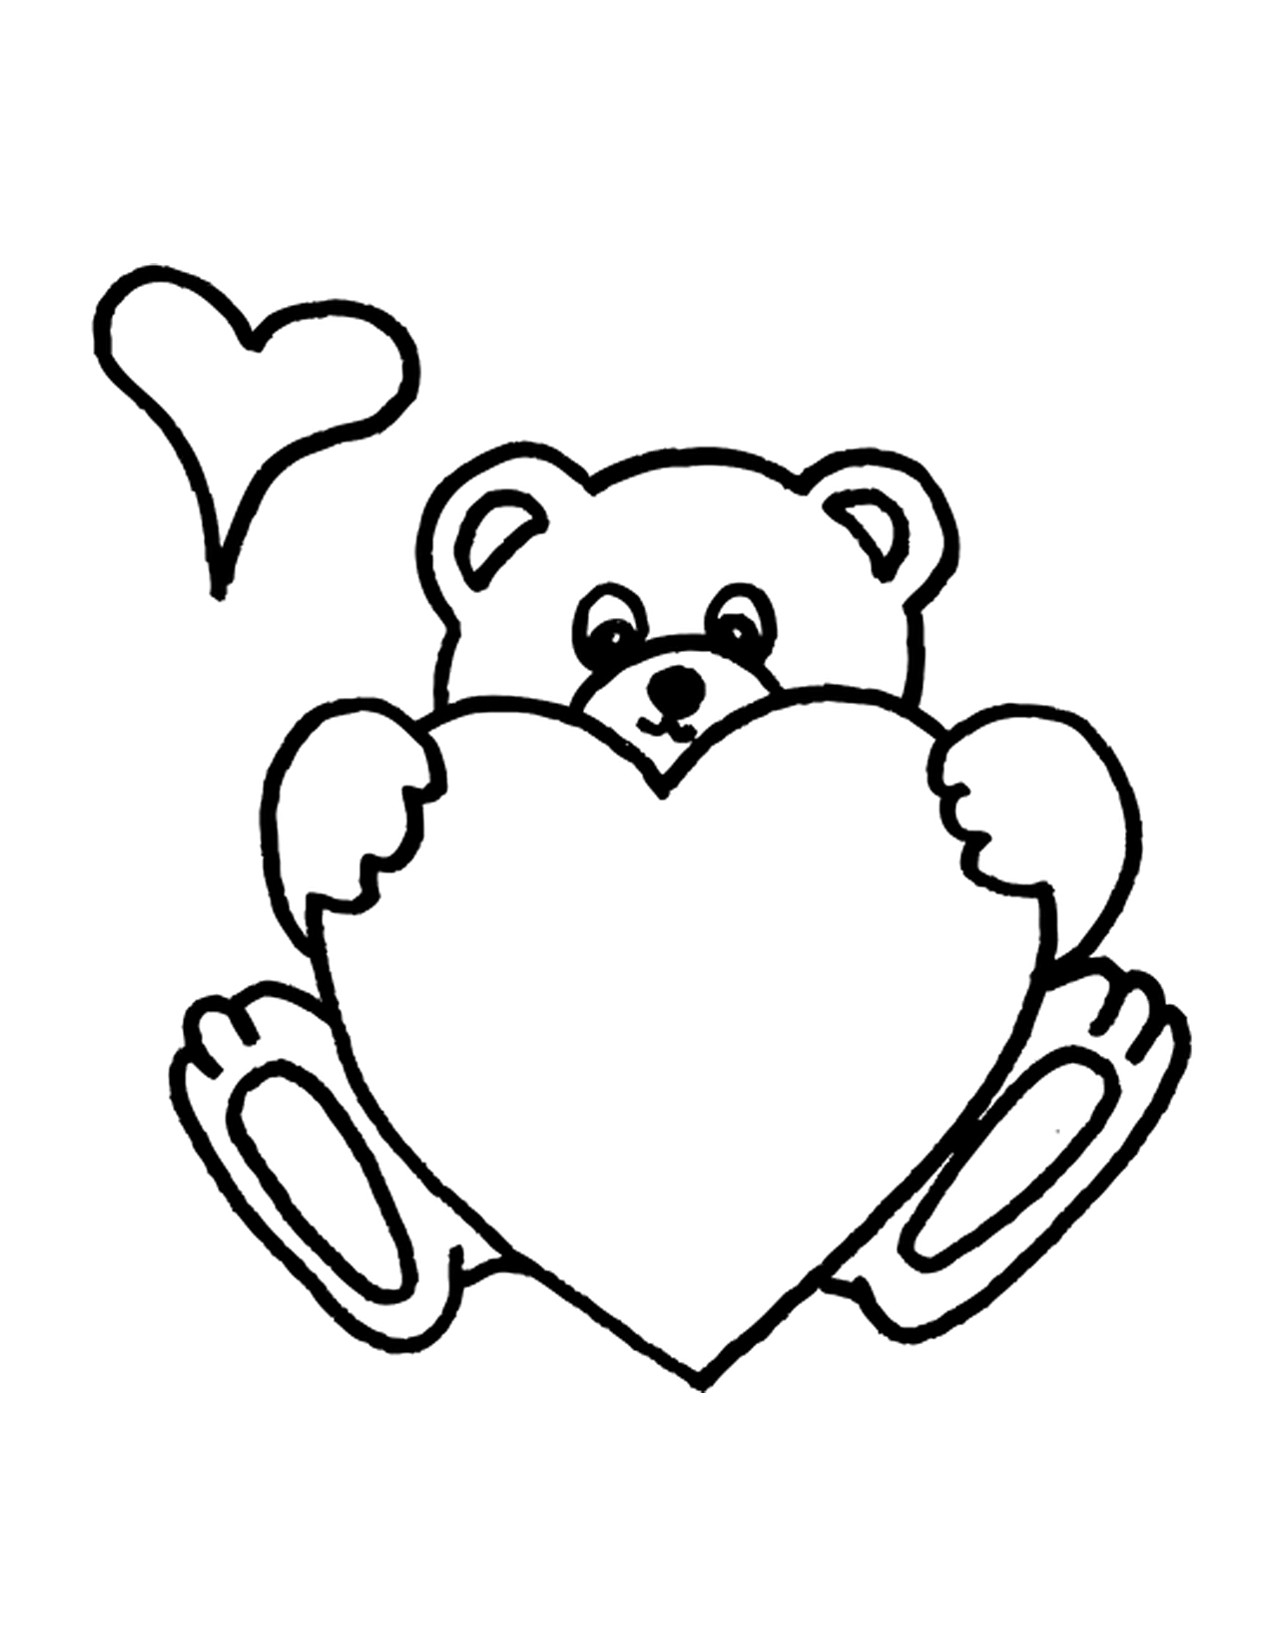 Valentine Teddy Bear Coloring Pages Valentines Coloring 01 Teddy Bear Pages Telematik Institut